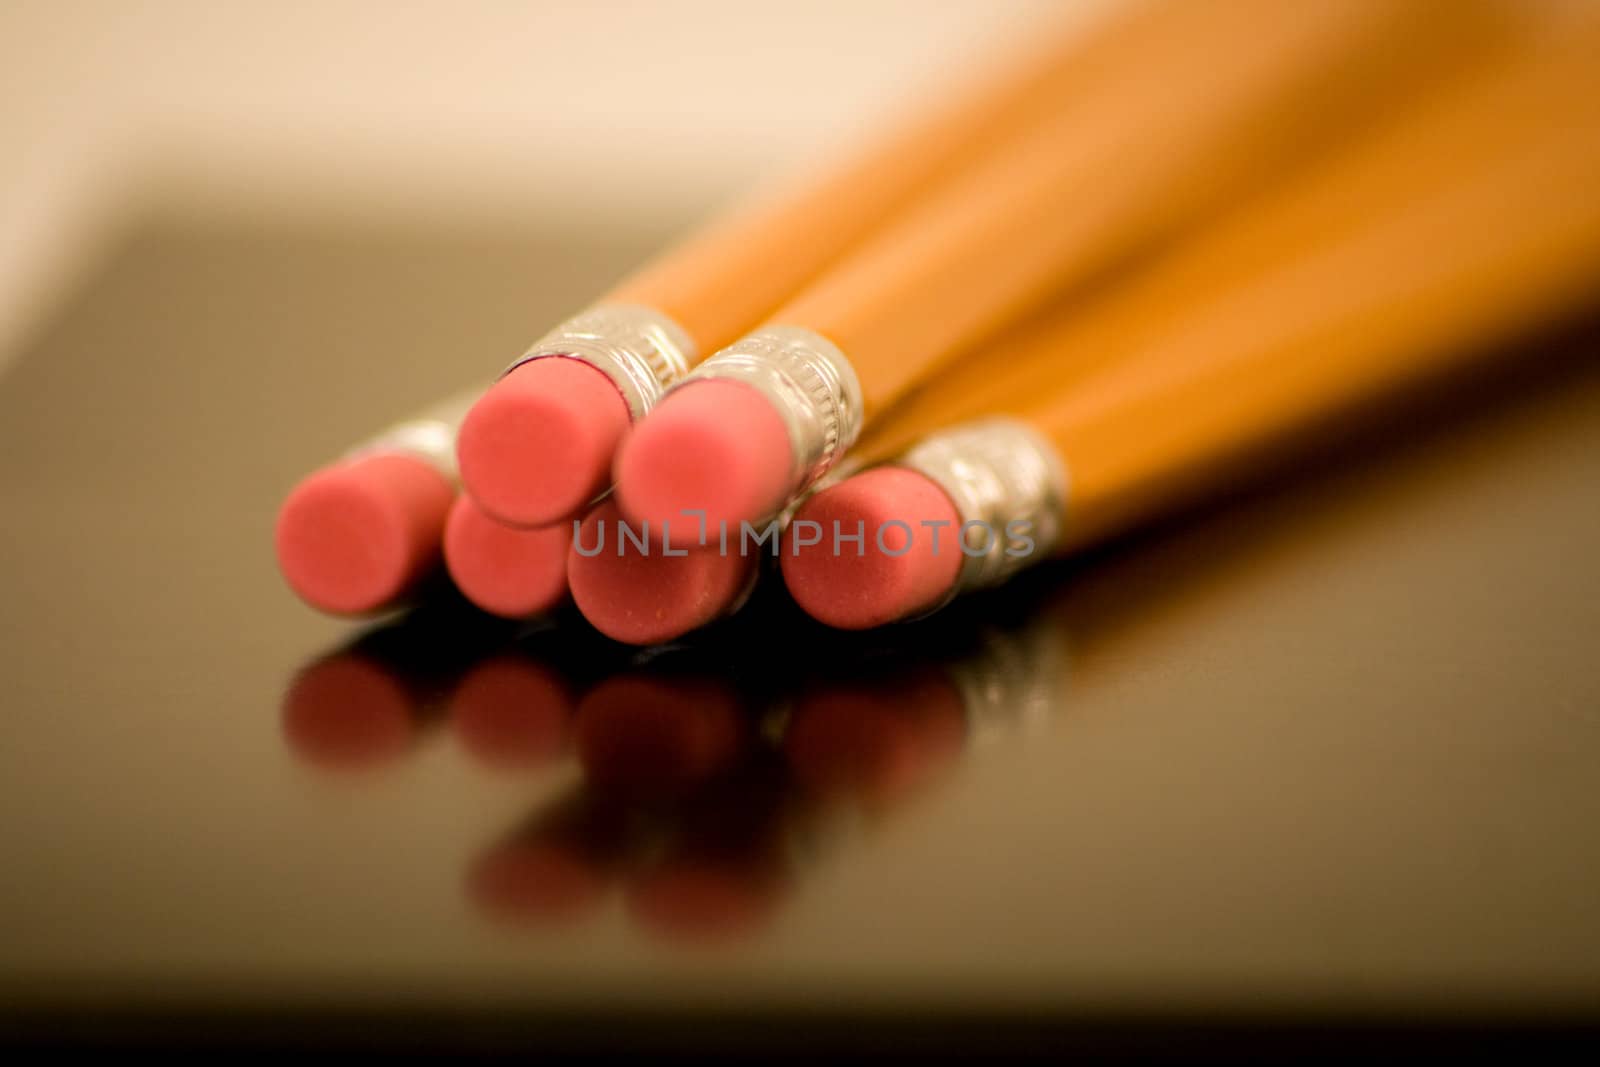 Erasers on Wood Pencils v1 are captured using depth of field with a reflection and nice perspective.
